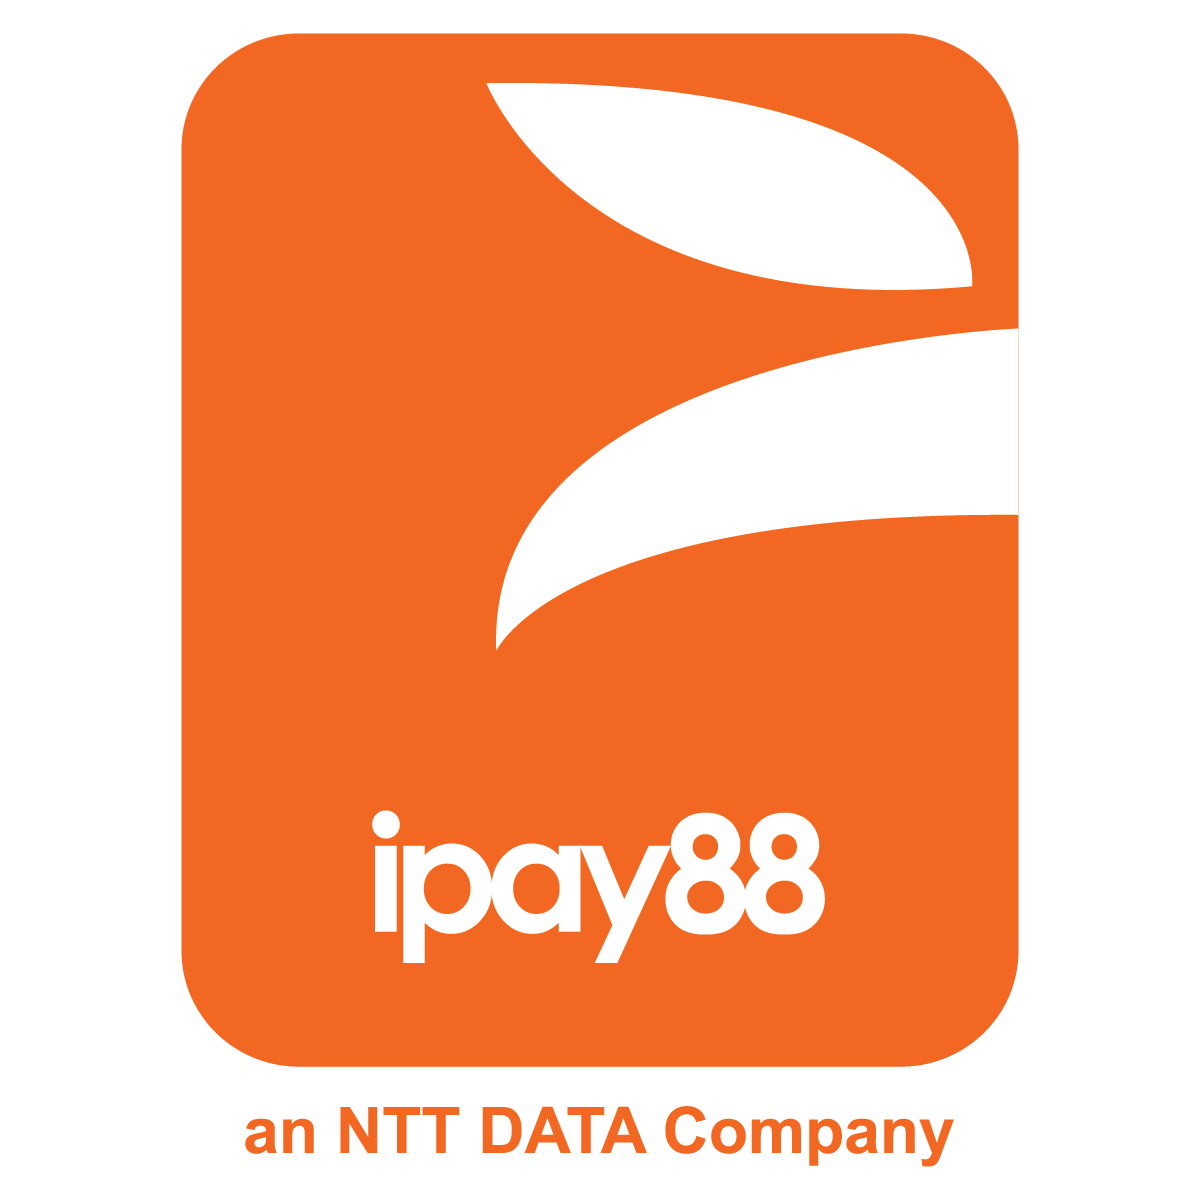 Hire Shopify Experts to integrate iPay88 Malaysia app into a Shopify store